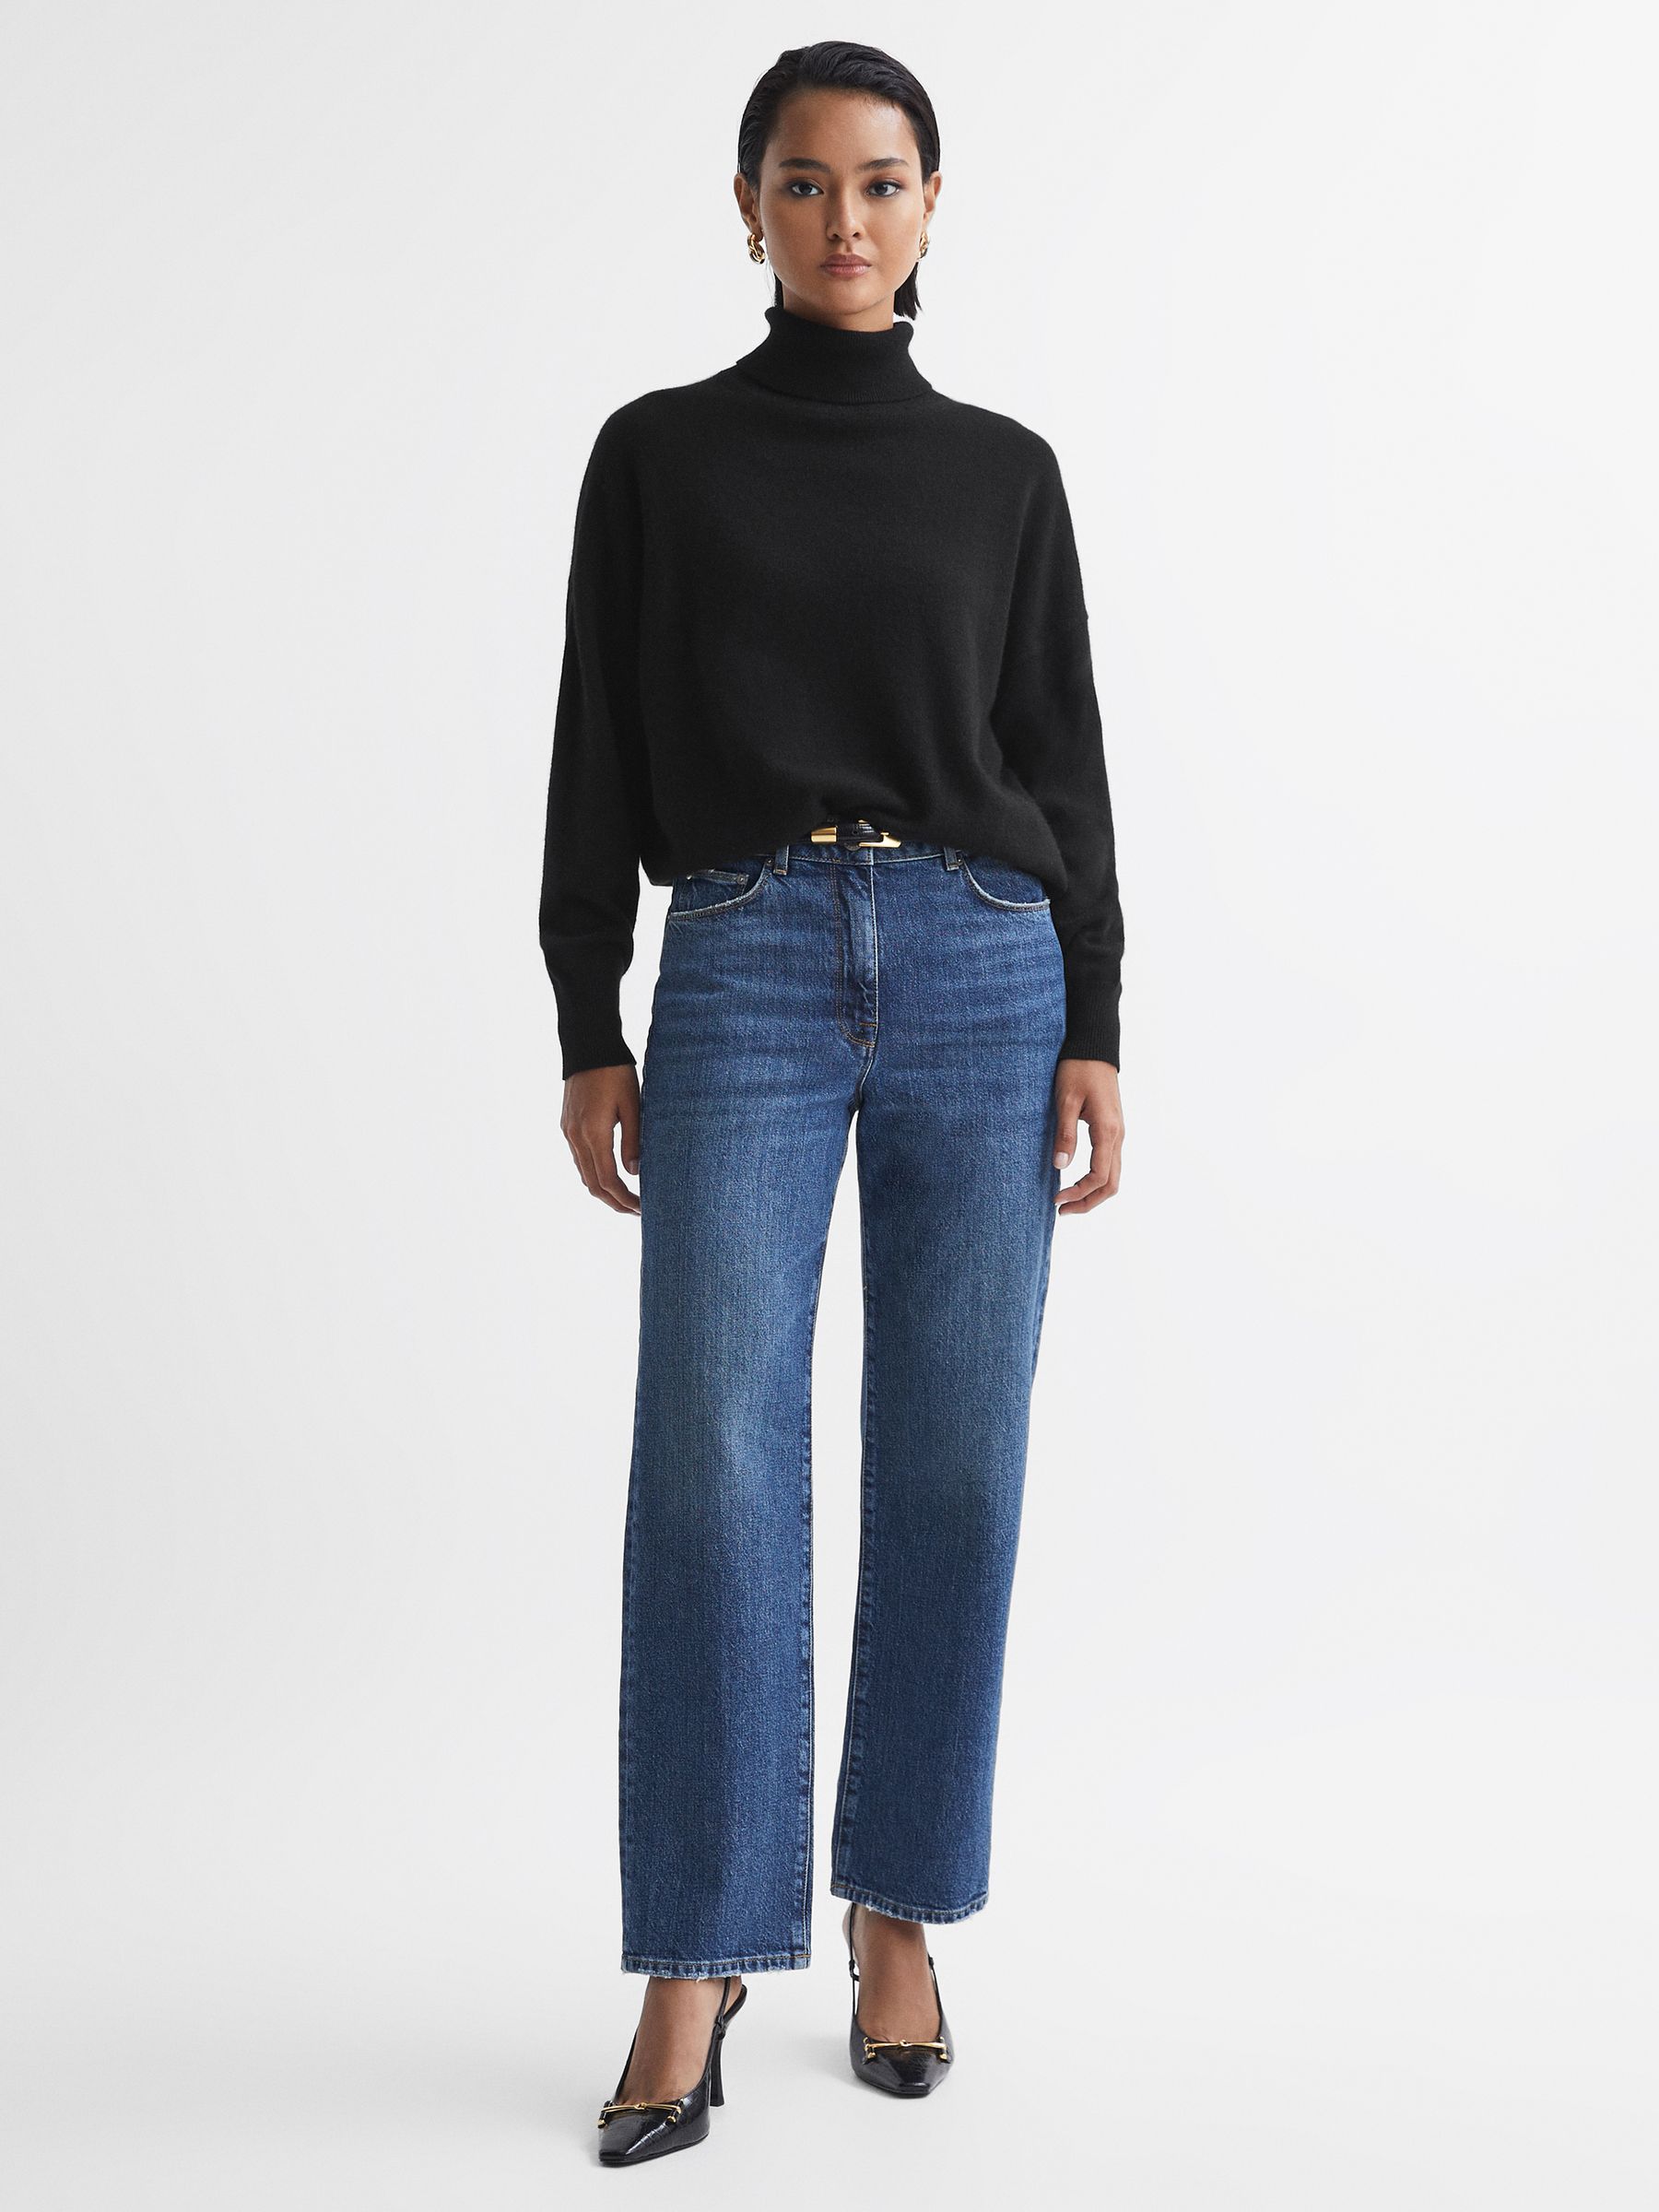 Fitted Cashmere Roll Neck Top in Black - REISS